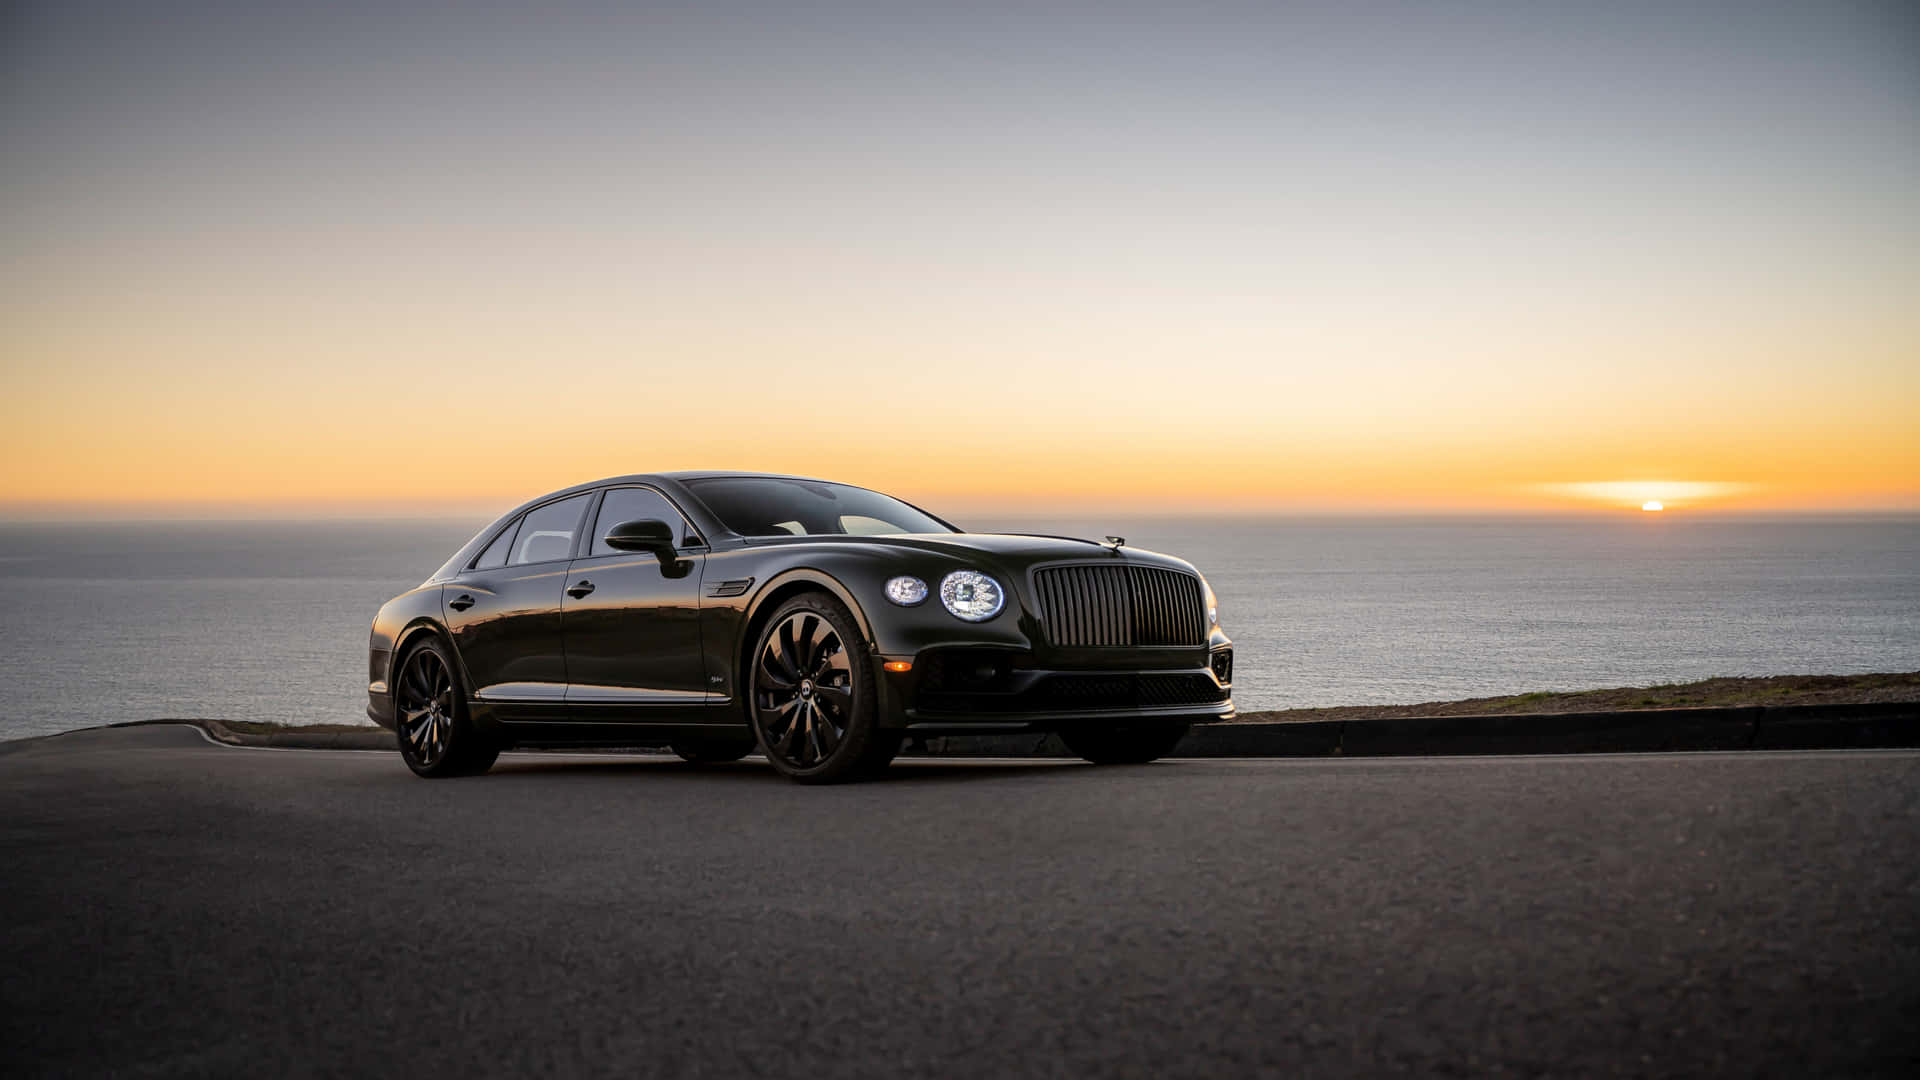 Caption: The Elegant and Powerful Bentley Flying Spur Cruising on the Open Road Wallpaper